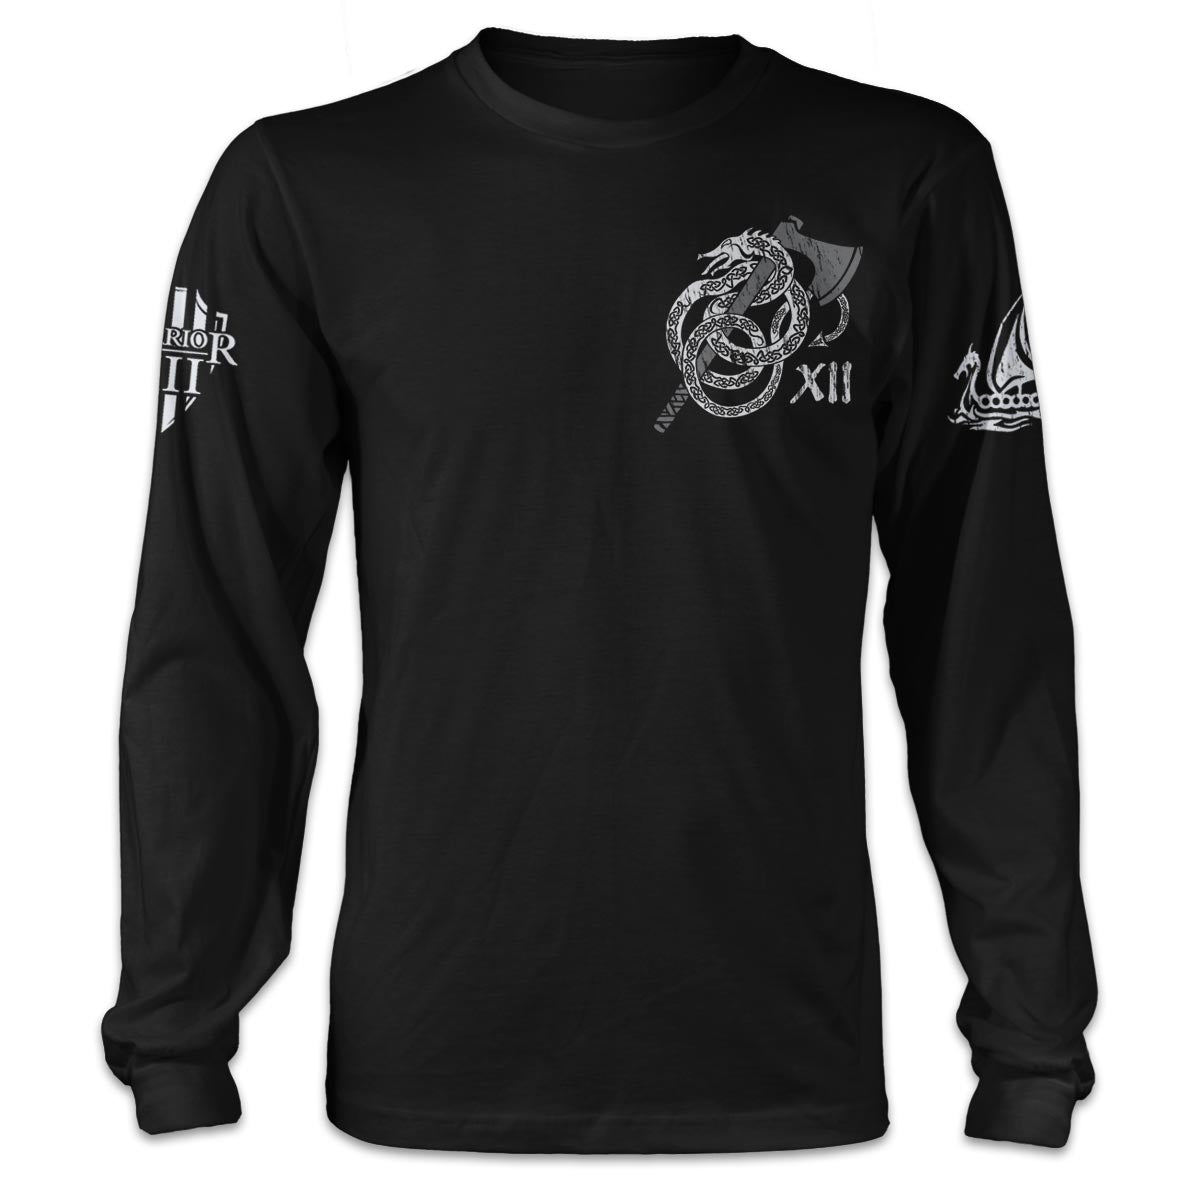 A black long sleeve shirt with a axe and sea serpent wrapped around it printed on the front of the shirt.